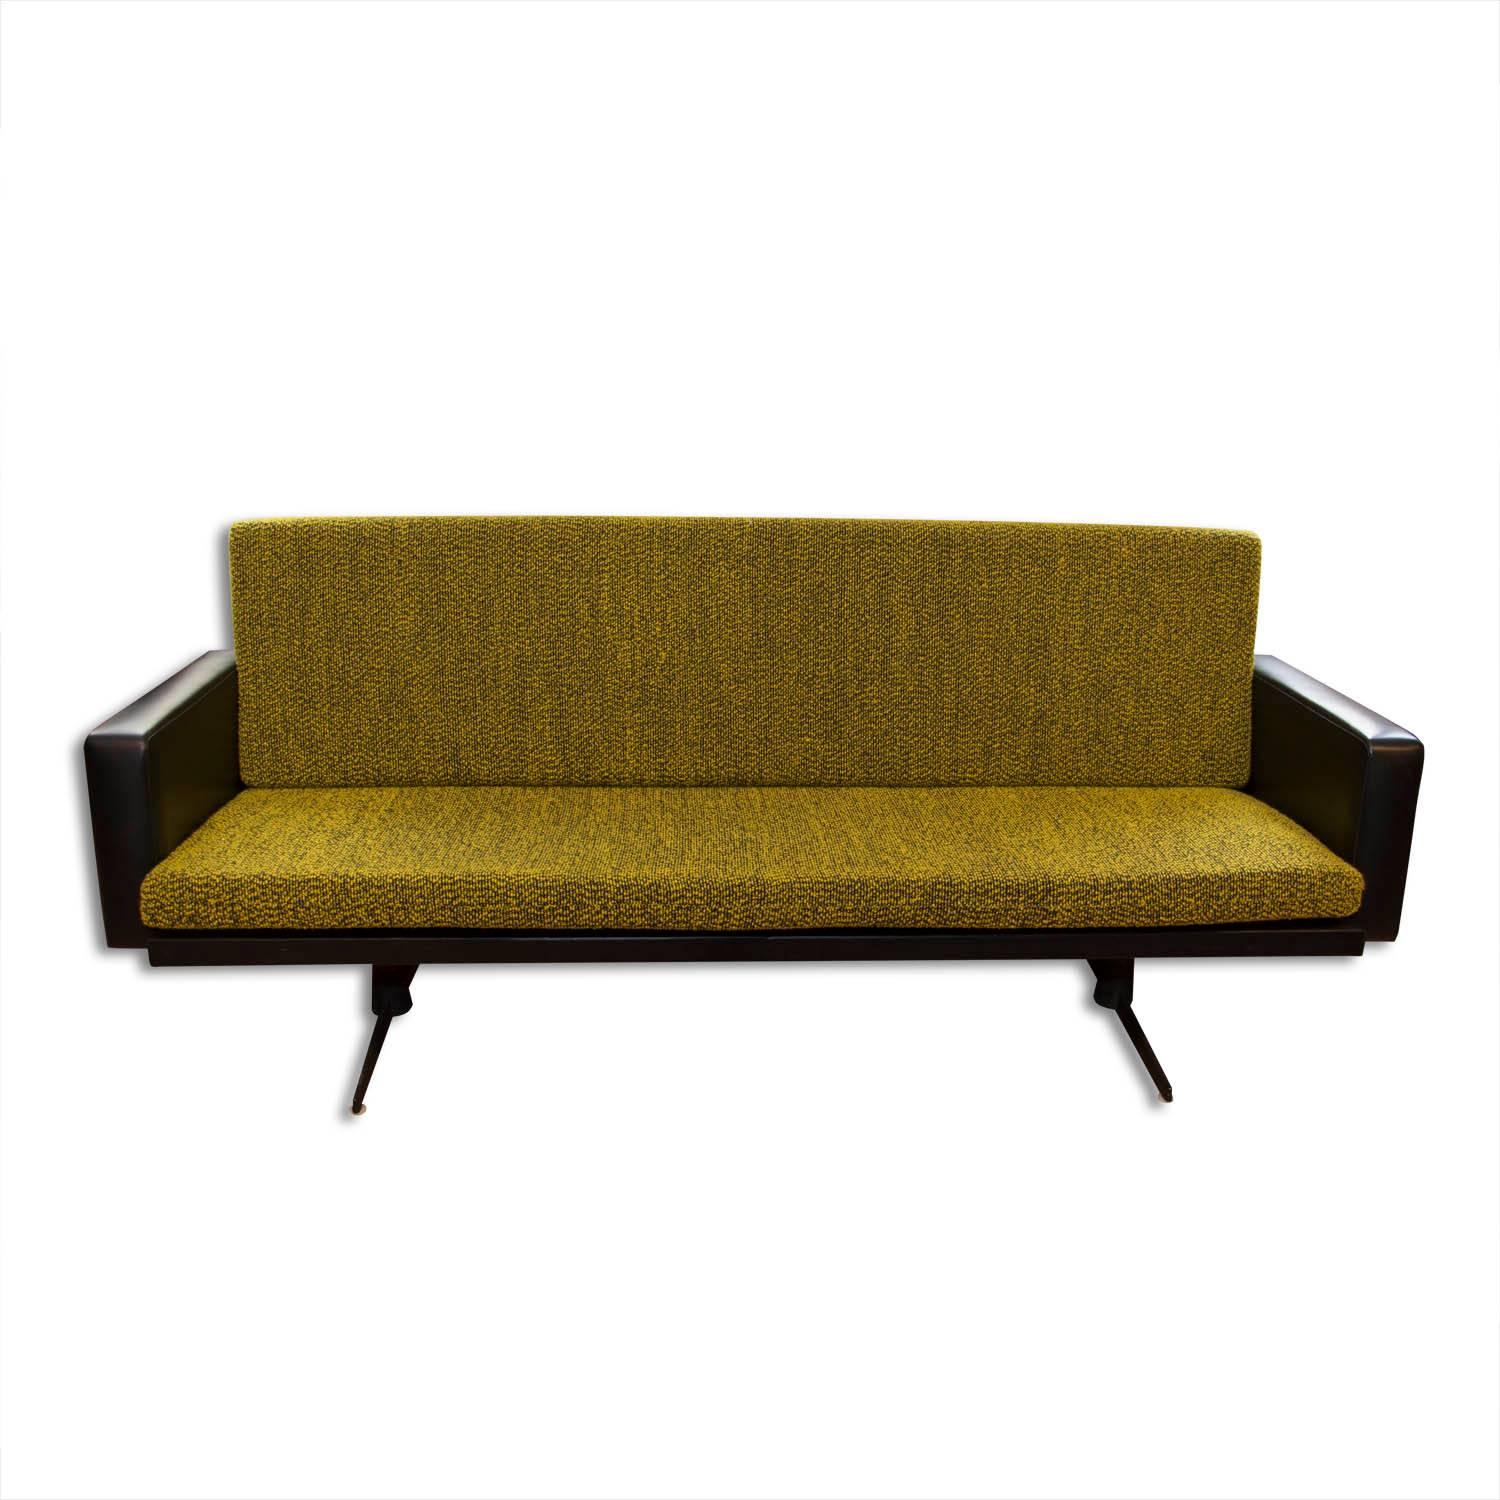 This lounge or office set was made in Czechoslovakia in the 1970s and consists of one sofa and a pair of swivel armchairs. The set is upholstered with brown leatherette and features original light green upholstery. The legs are made from iron. All